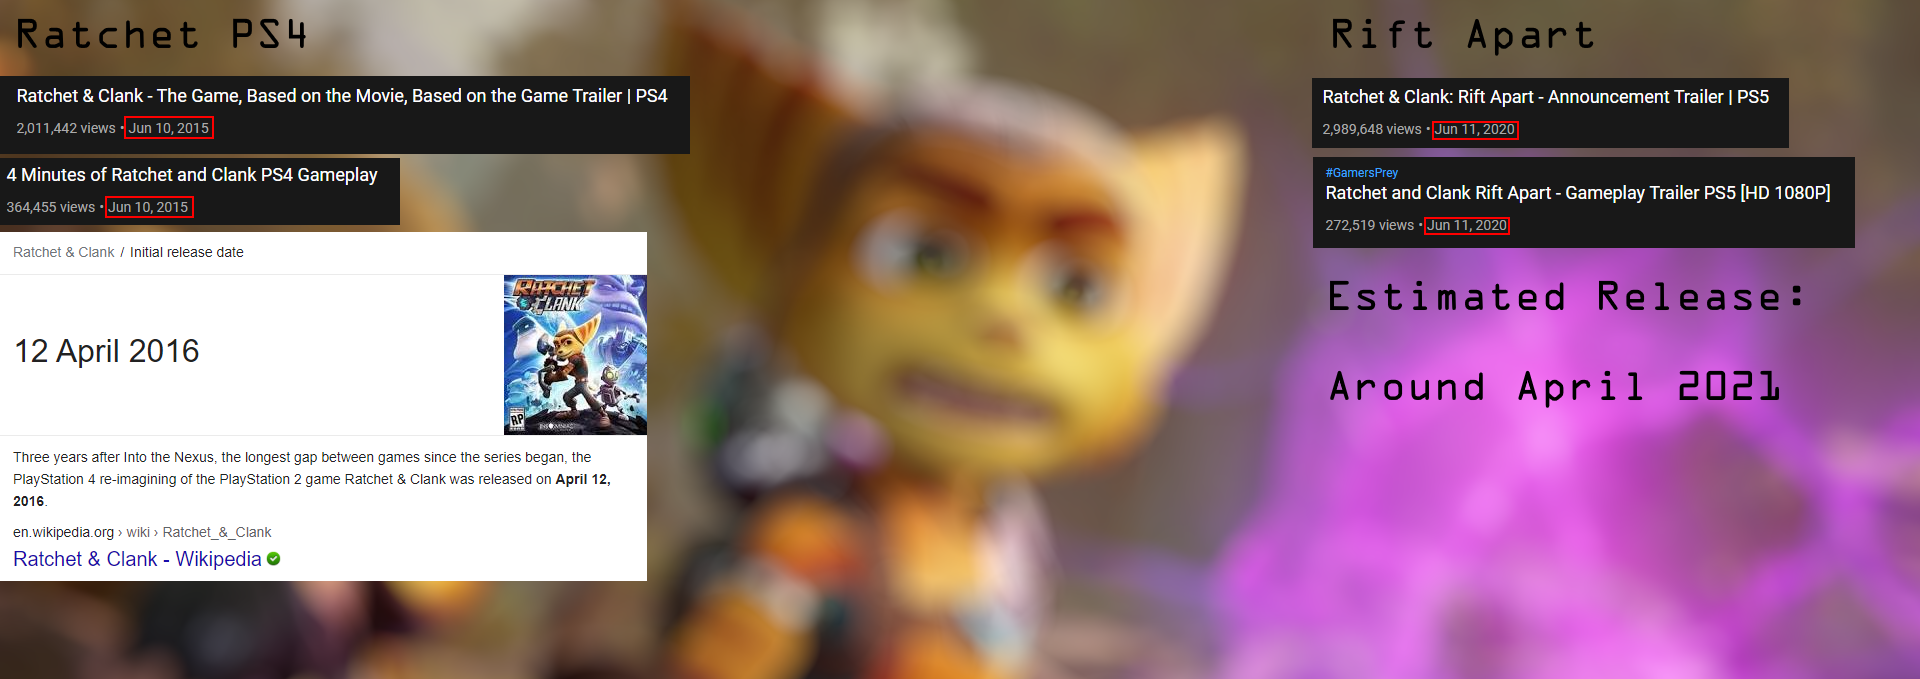 ratchet and clank wiki movie